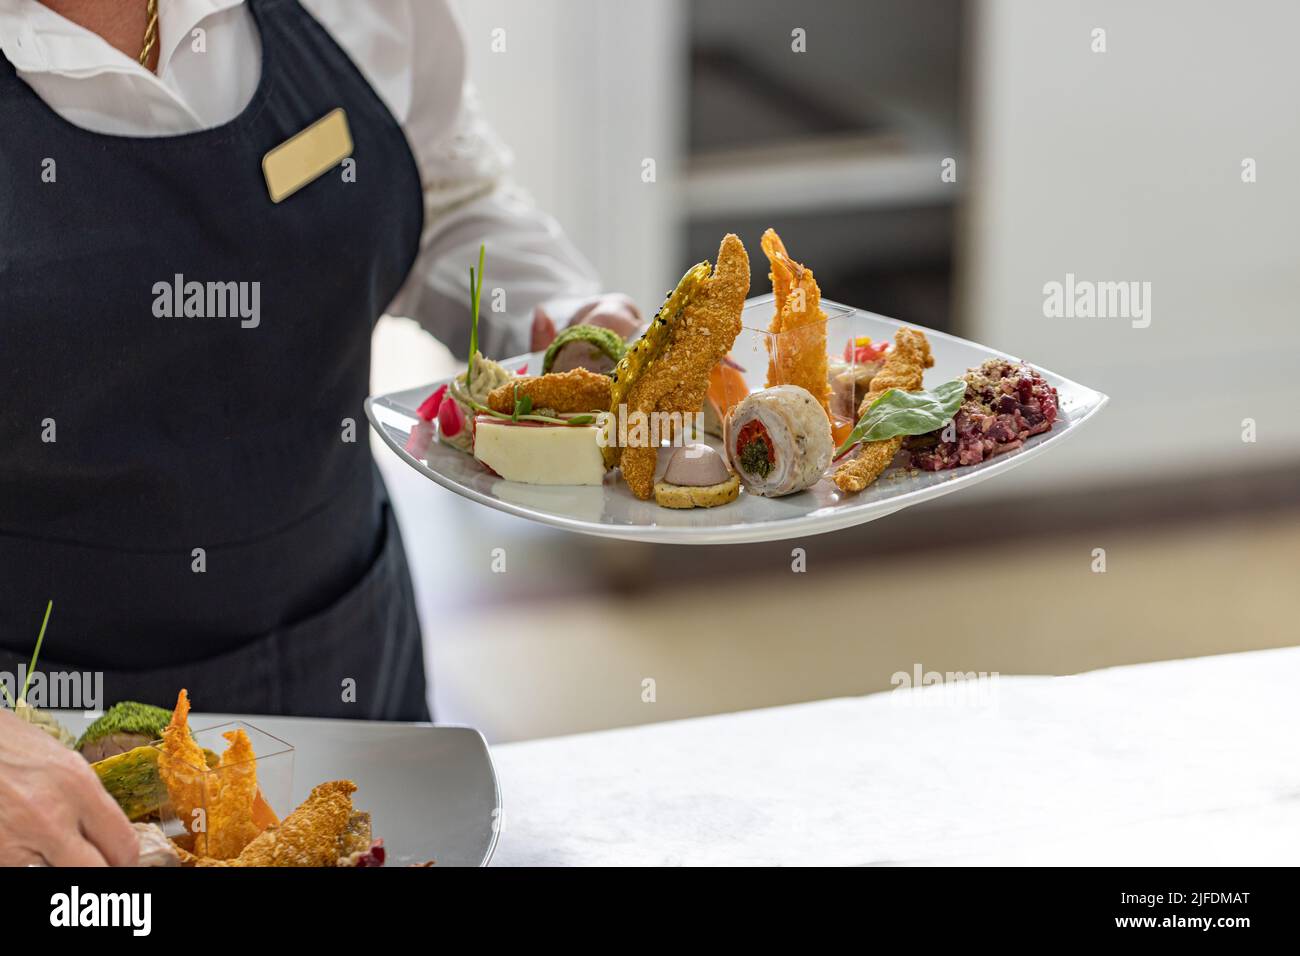 Waitress is carrying plates with starter dish Stock Photo